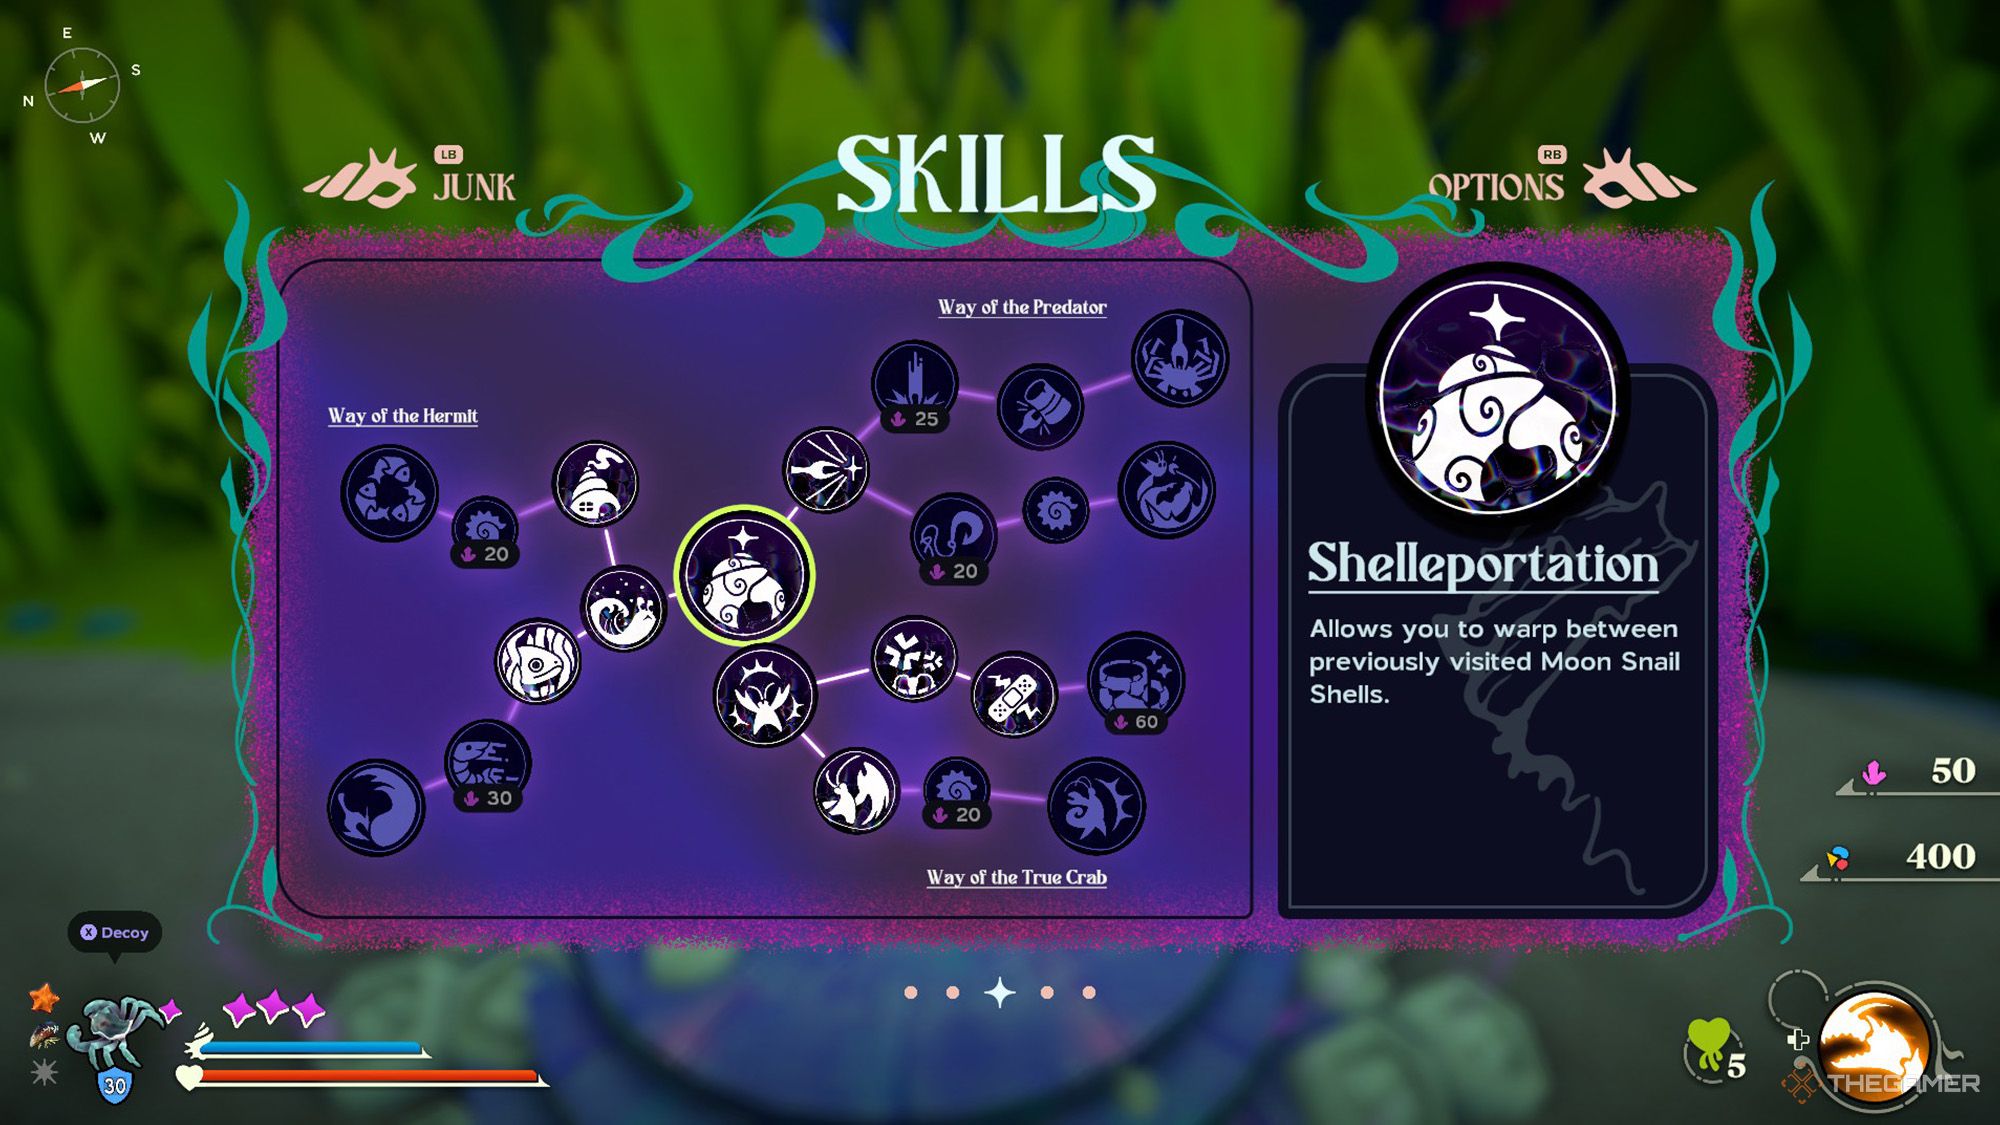 Another Crab's Treasure - Skills screen displays some skills that Kril has unlocked before a tough battle